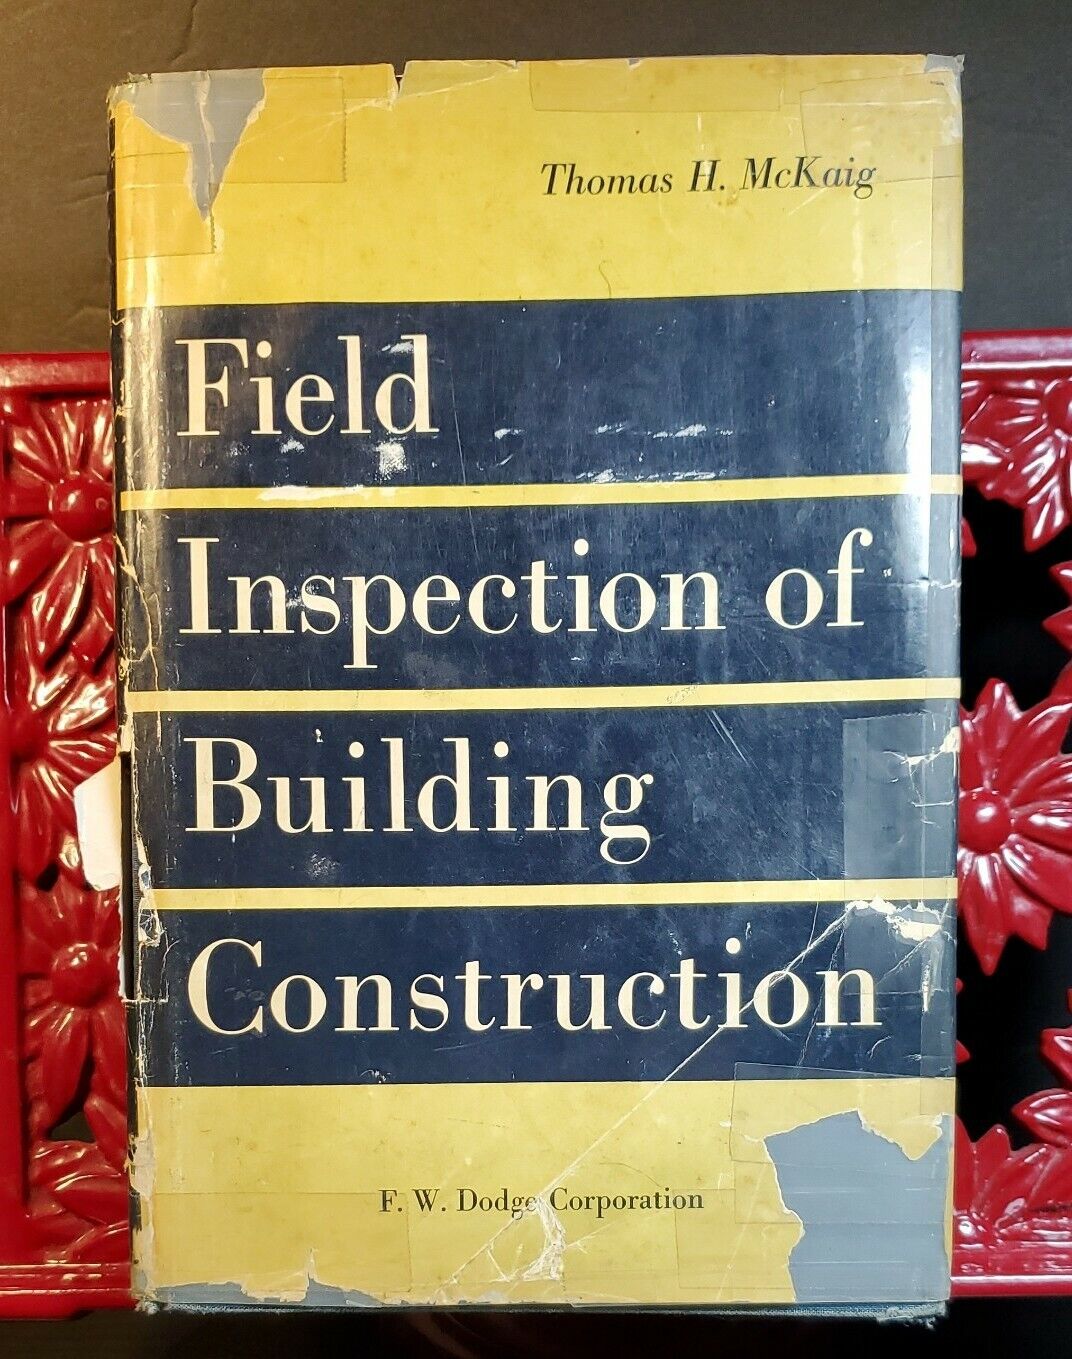 FIELD INSPECTION OF BUILDING CONSTRUCTION By Thomas McKaig - Hardcover 1958